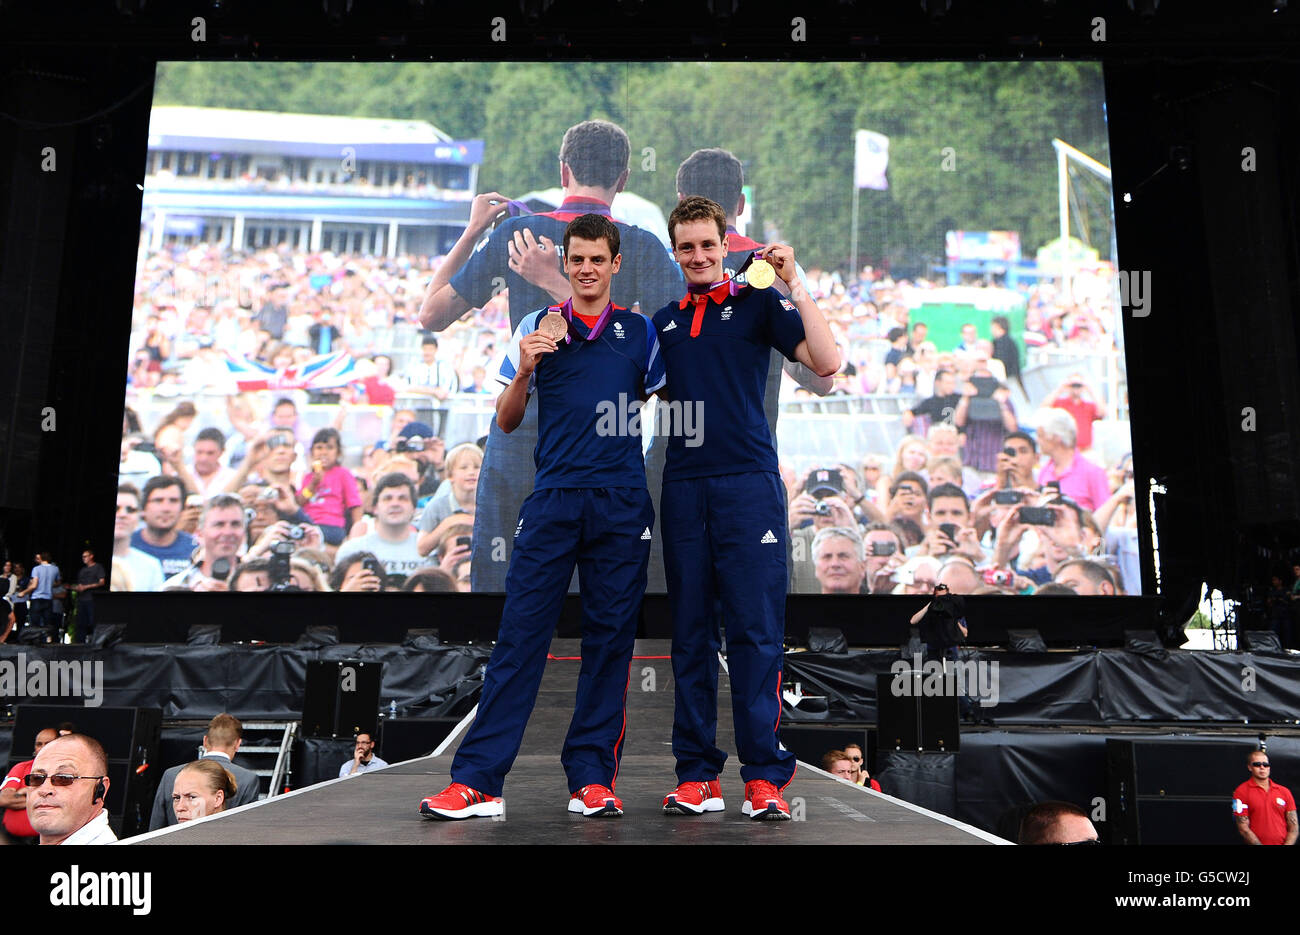 Jonny (left) and Alistair Brownlee show off their bronze and gold medals respectively won in the Mens Triathlon at BT London Live, a series of outdoor concerts to celebrate the Olympic and Paralympic Games, at Hyde Park in London. Stock Photo